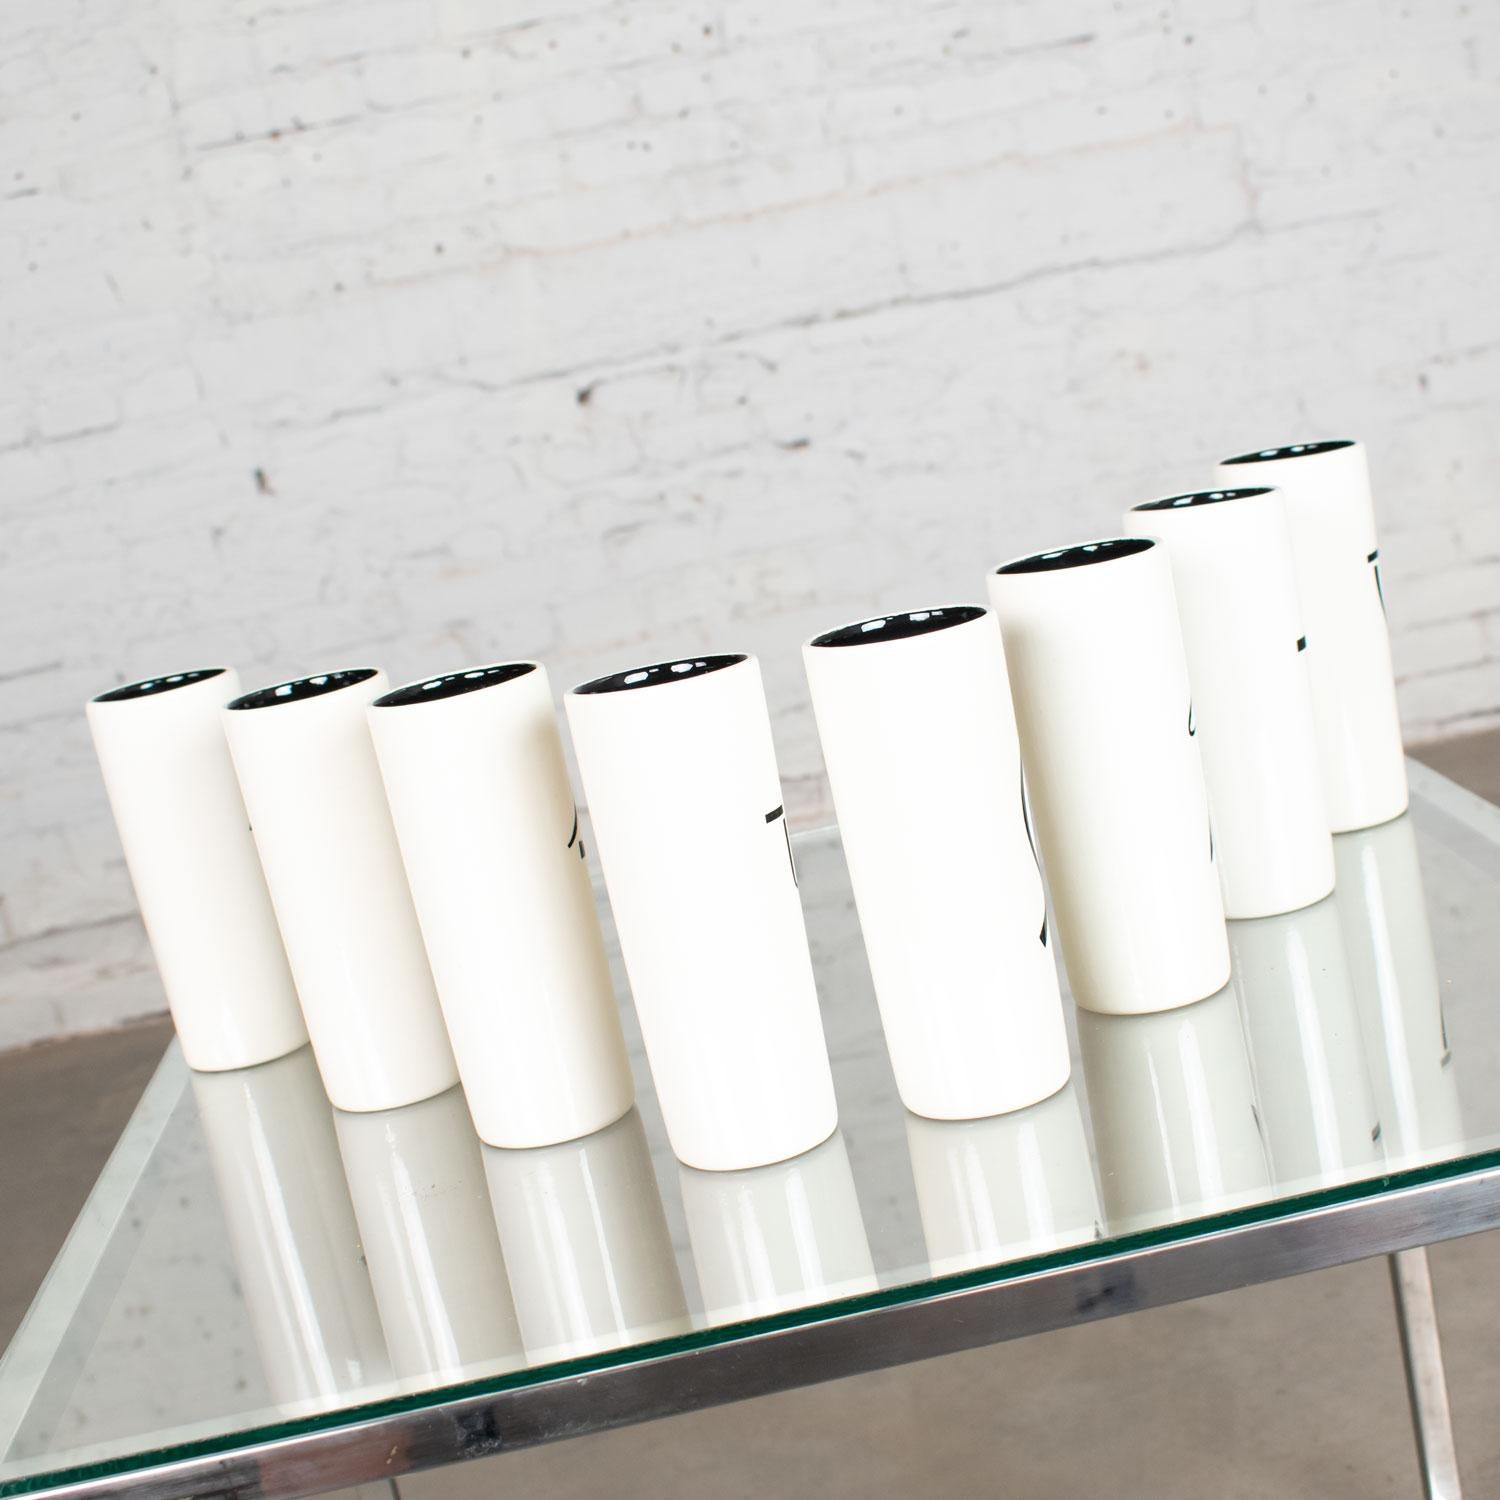 Unknown 8 Vintage Mid-Century Modern Ceramic Tumblers White and Black with Asian Symbols For Sale